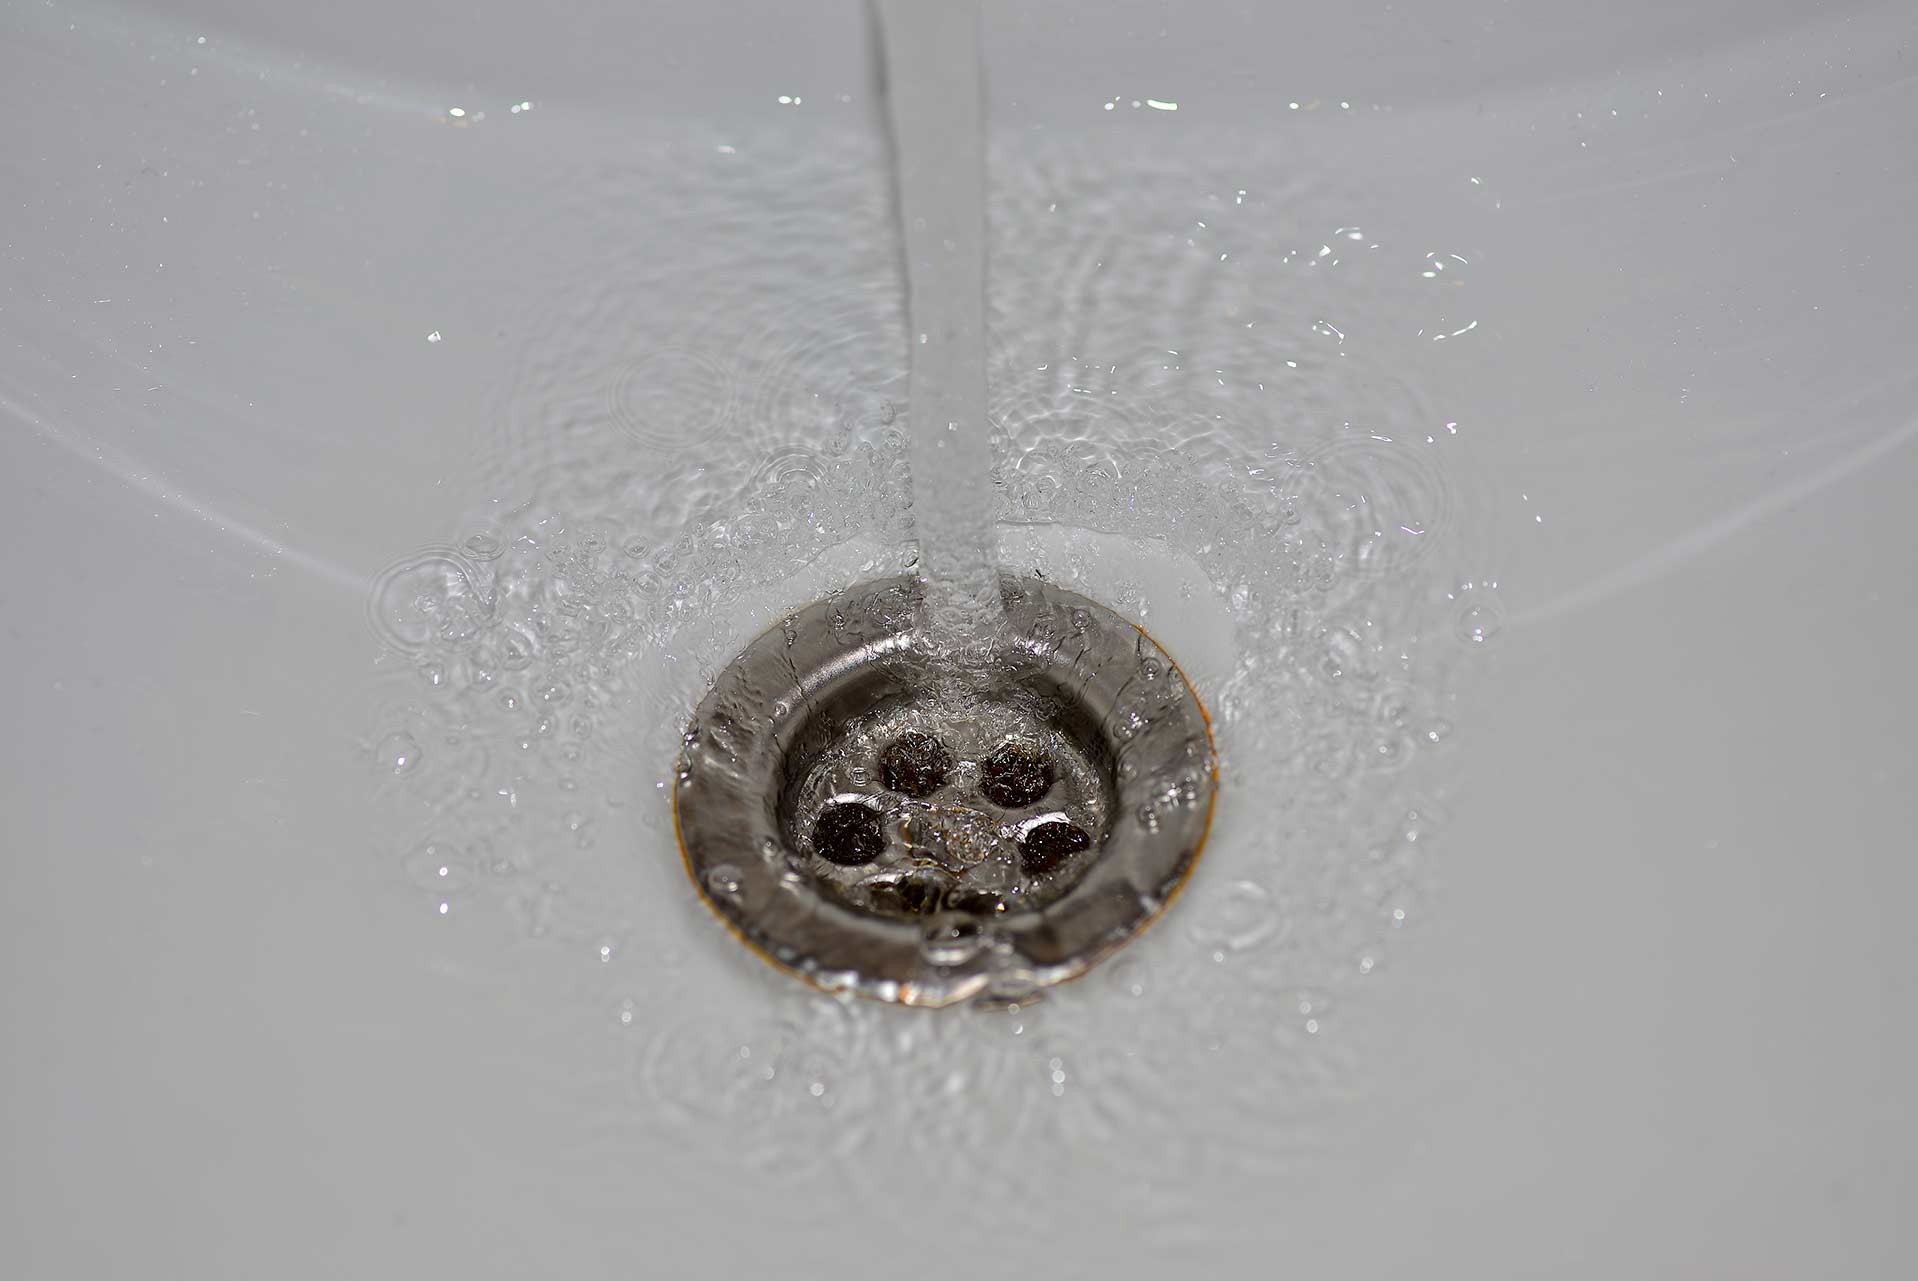 A2B Drains provides services to unblock blocked sinks and drains for properties in Melksham.